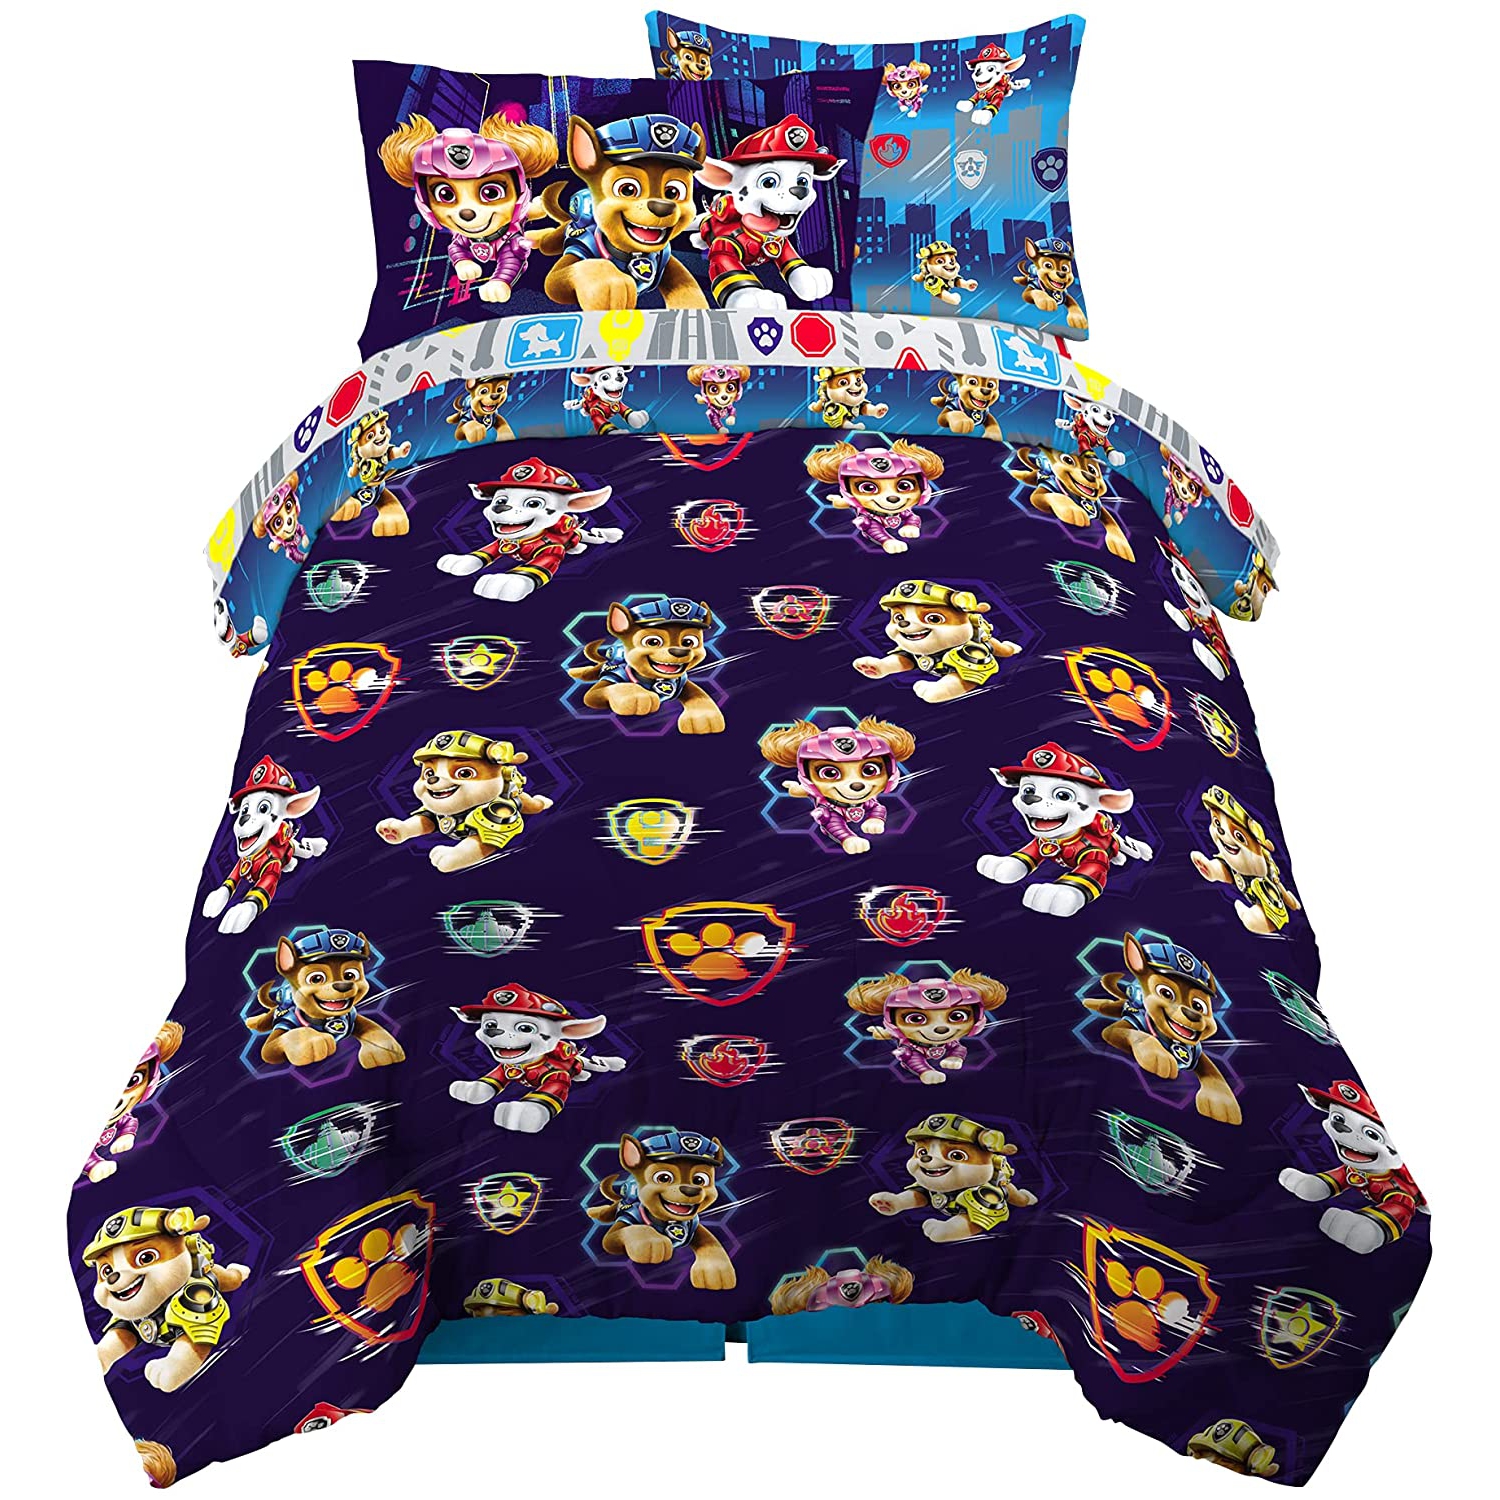 Paw Patrol Bright Light Pups Chase Marshall Rubble Skye Kids Bedding Sheet Set with Reversible Comforter Twin Bed in Bag 4 pcs Set